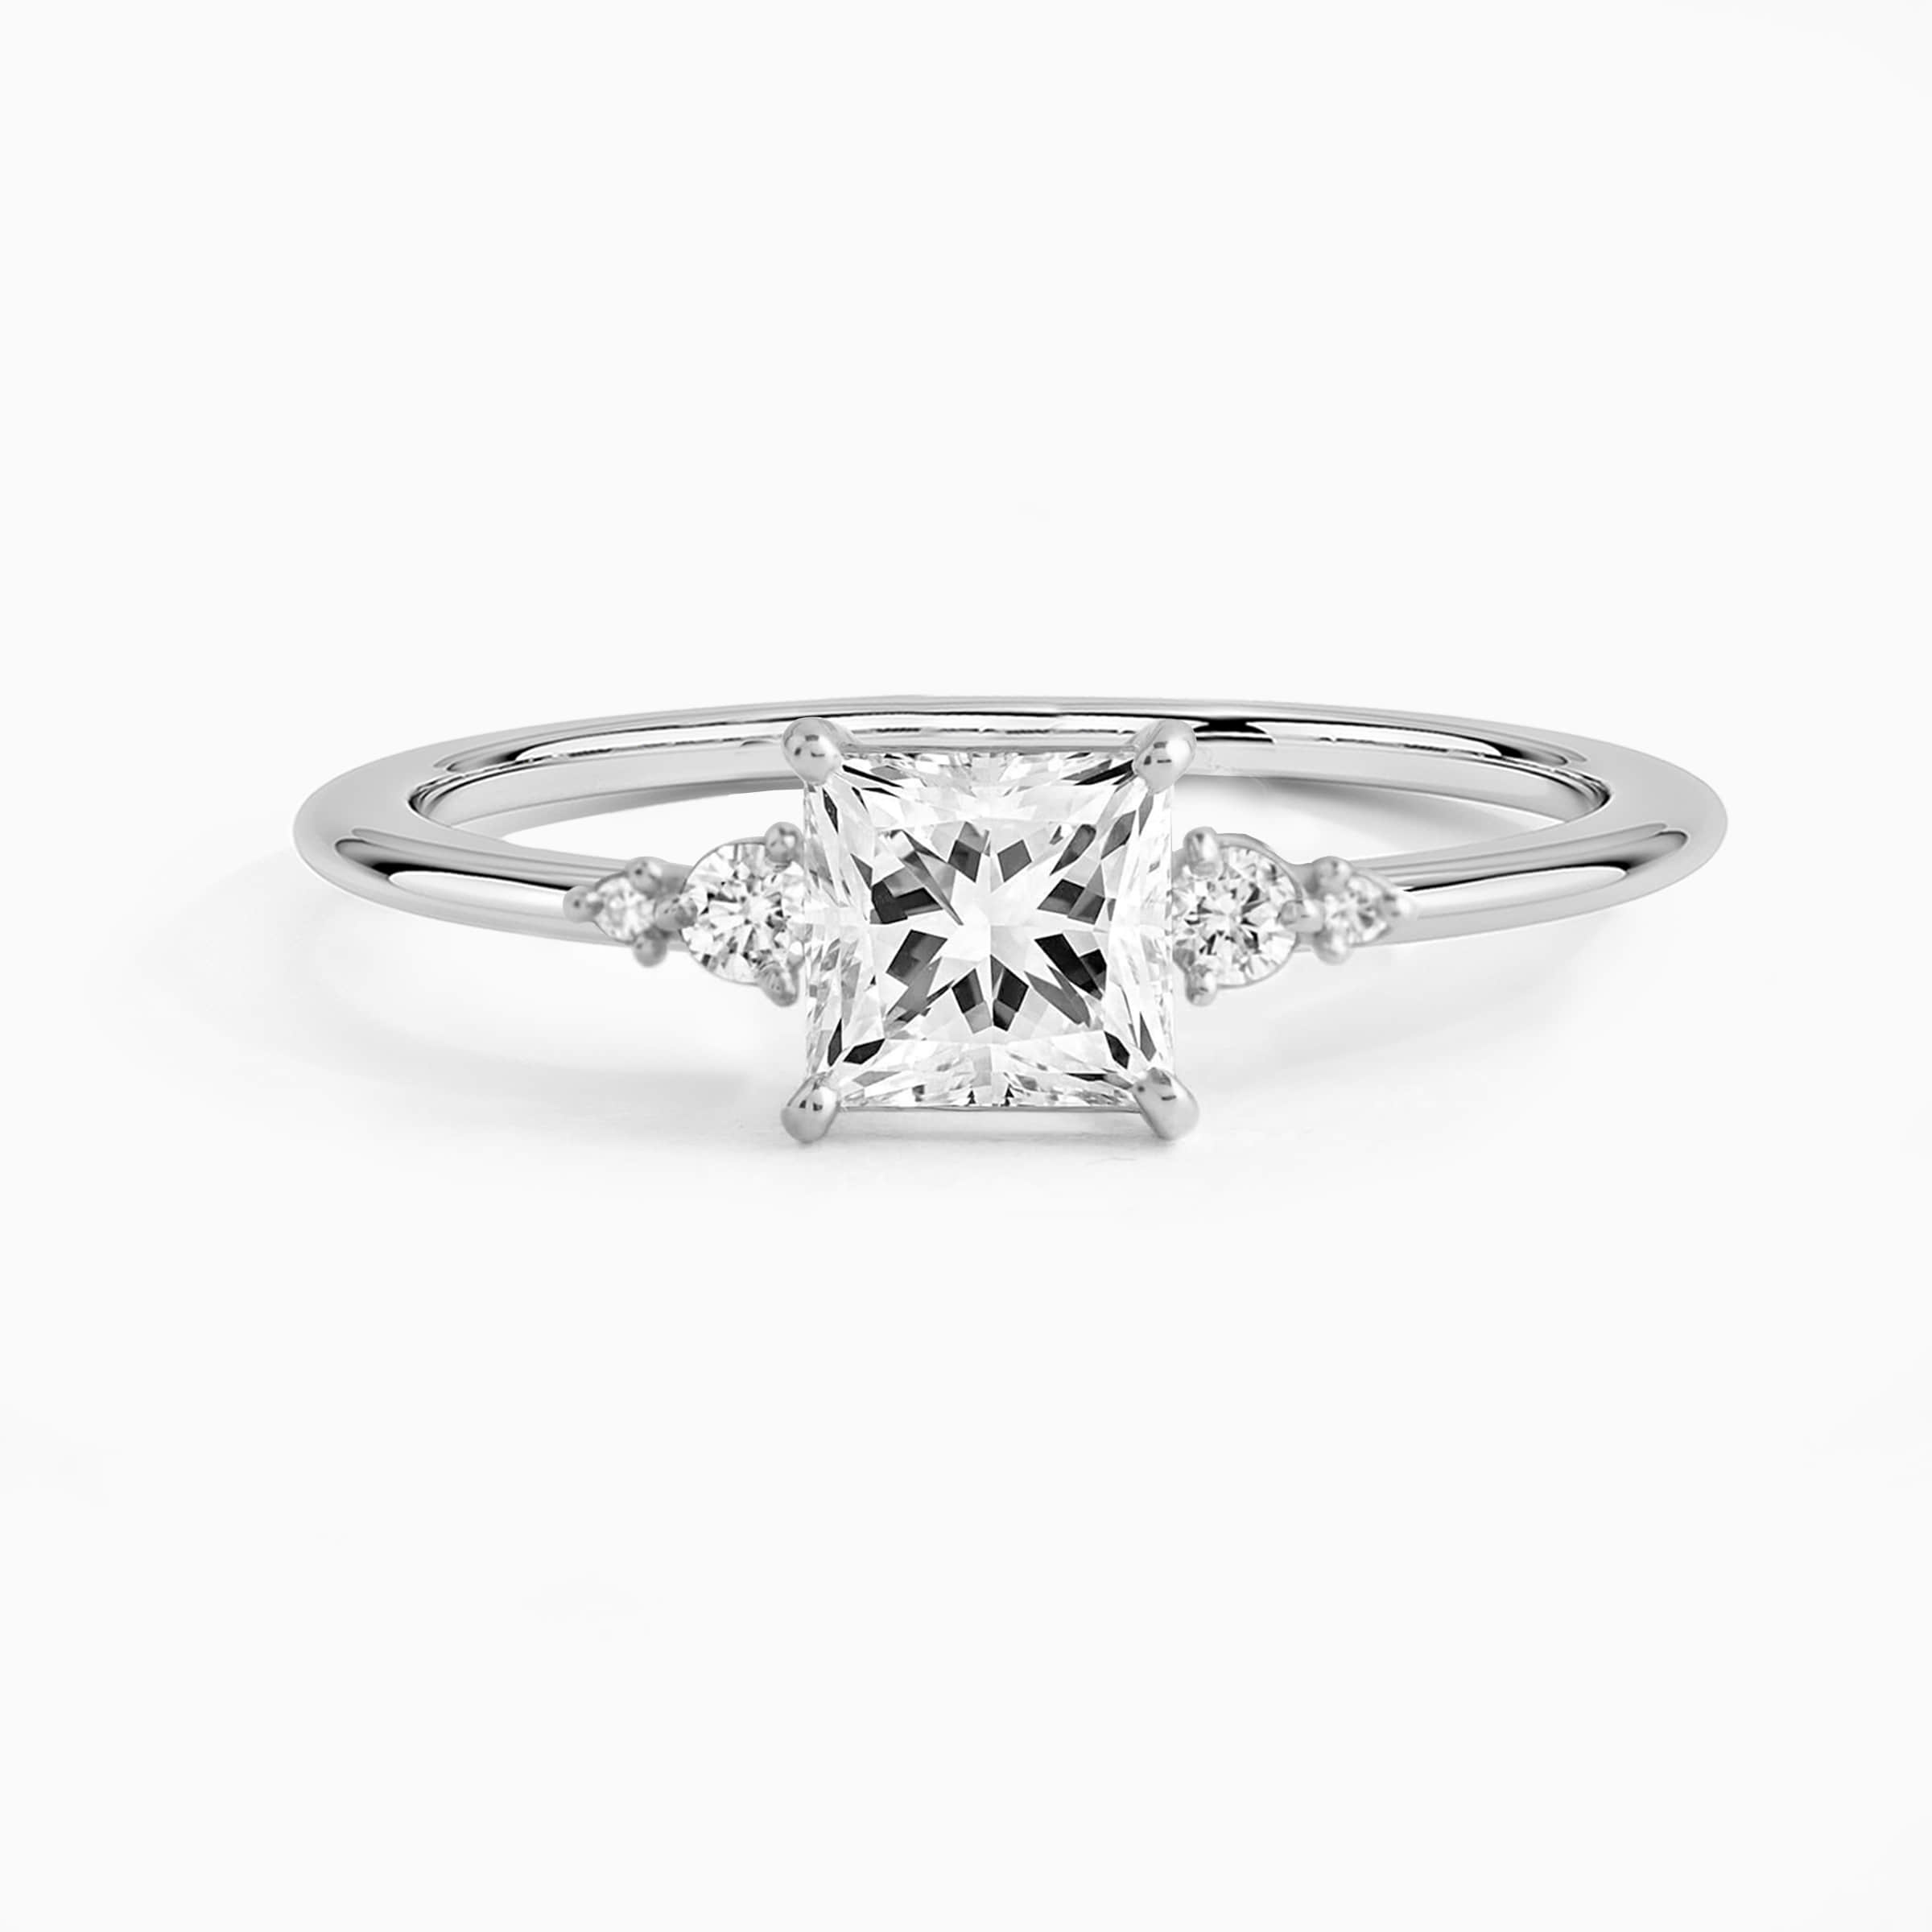 Darry Ring princess cut engagement ring in white gold